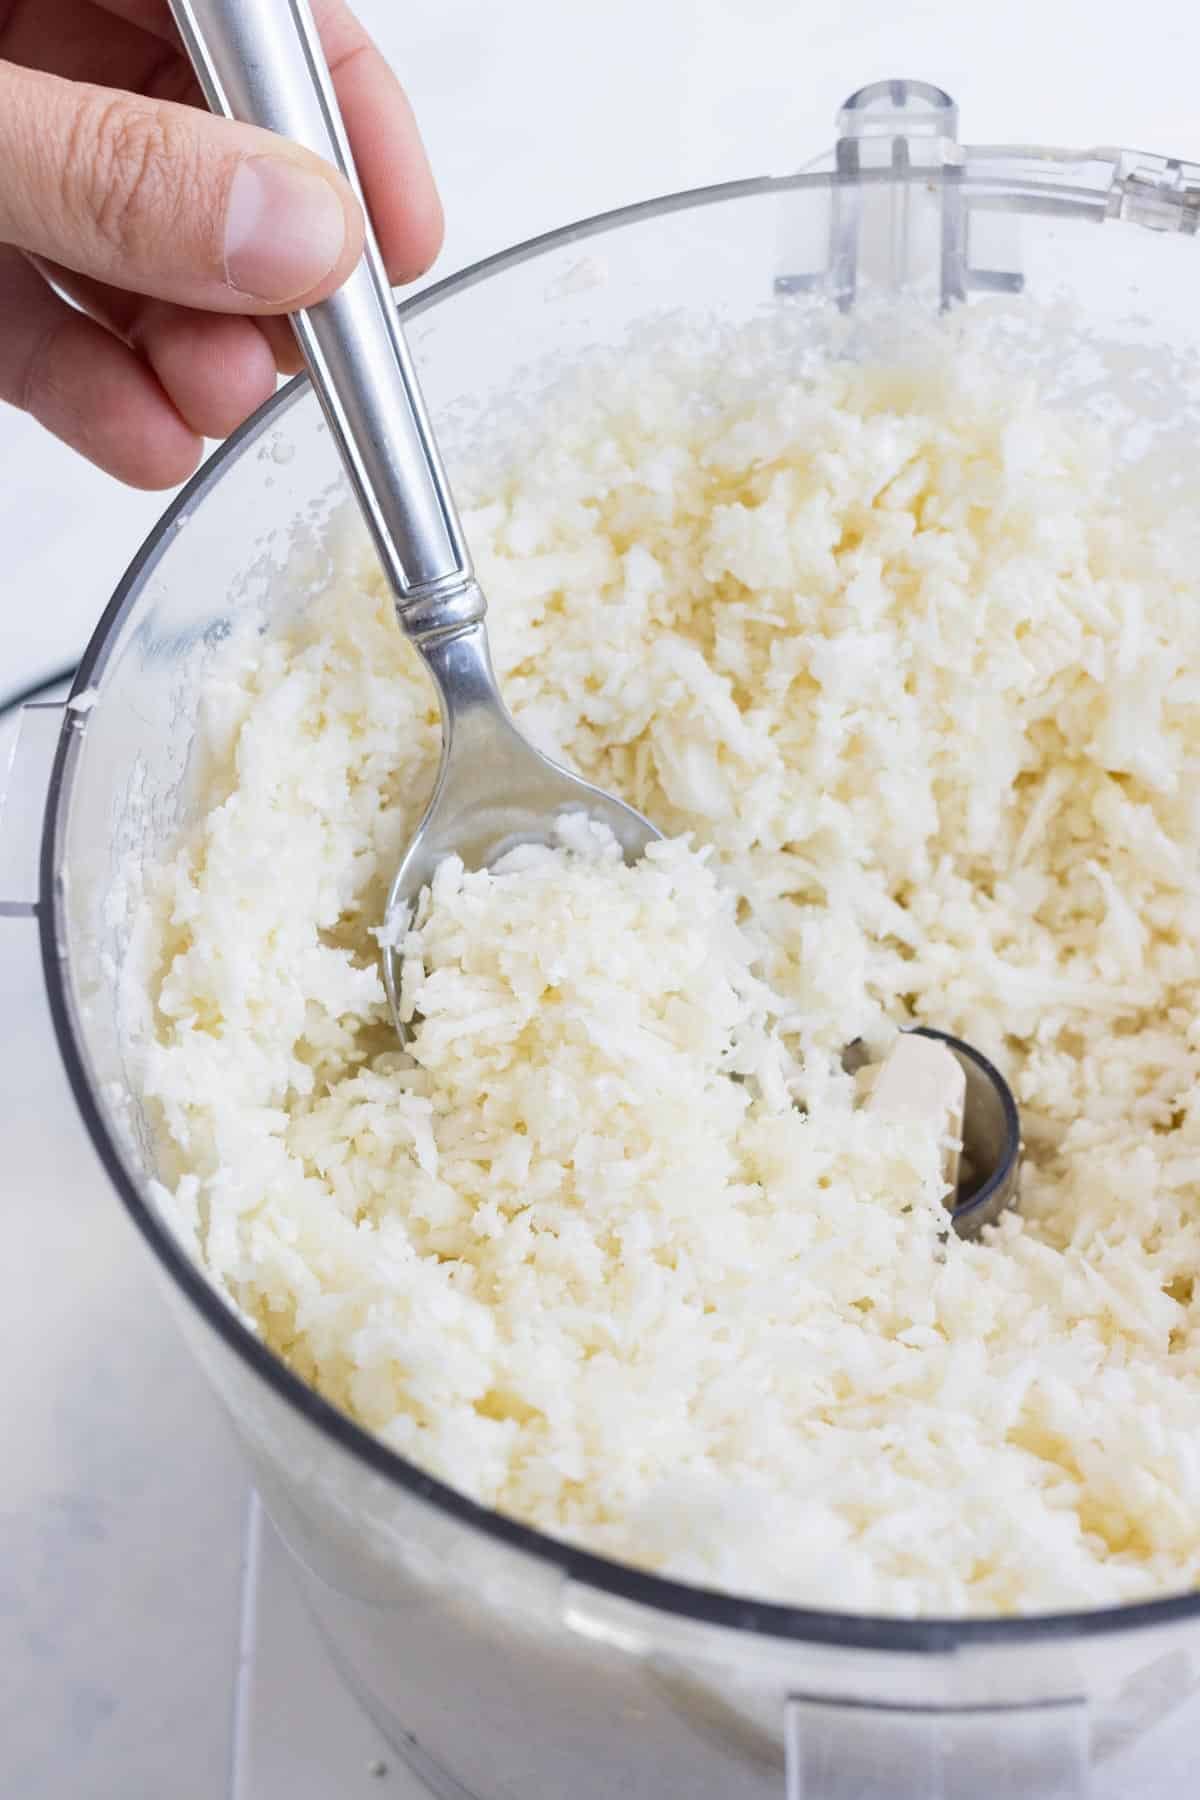 A bowl full of riced cauliflower for your favorite rice dishes.